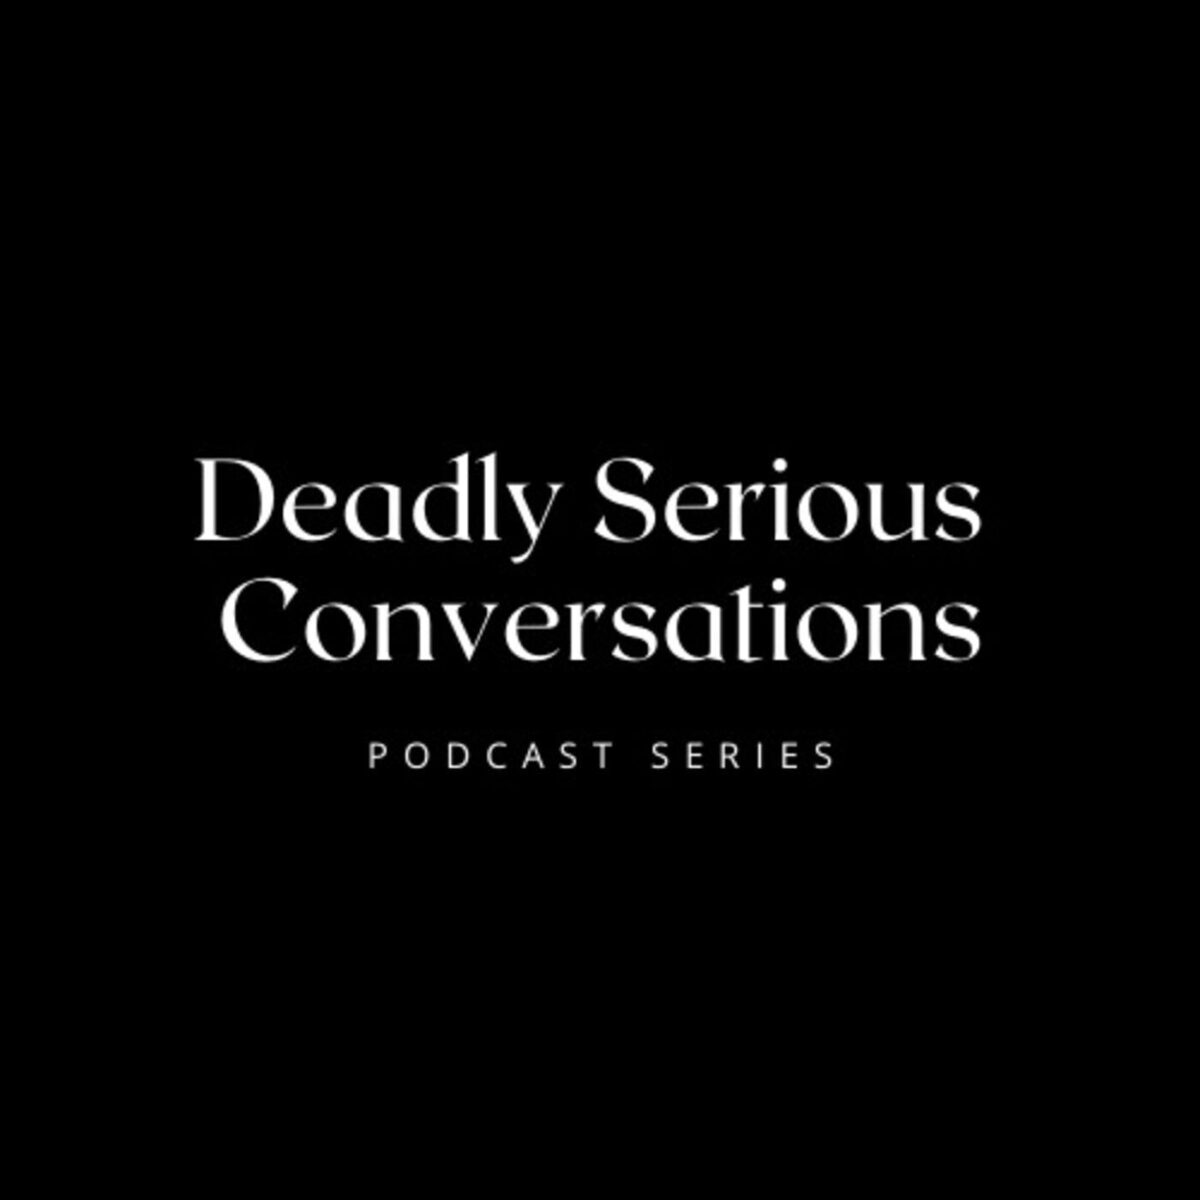 Deadly serious conversations podcast